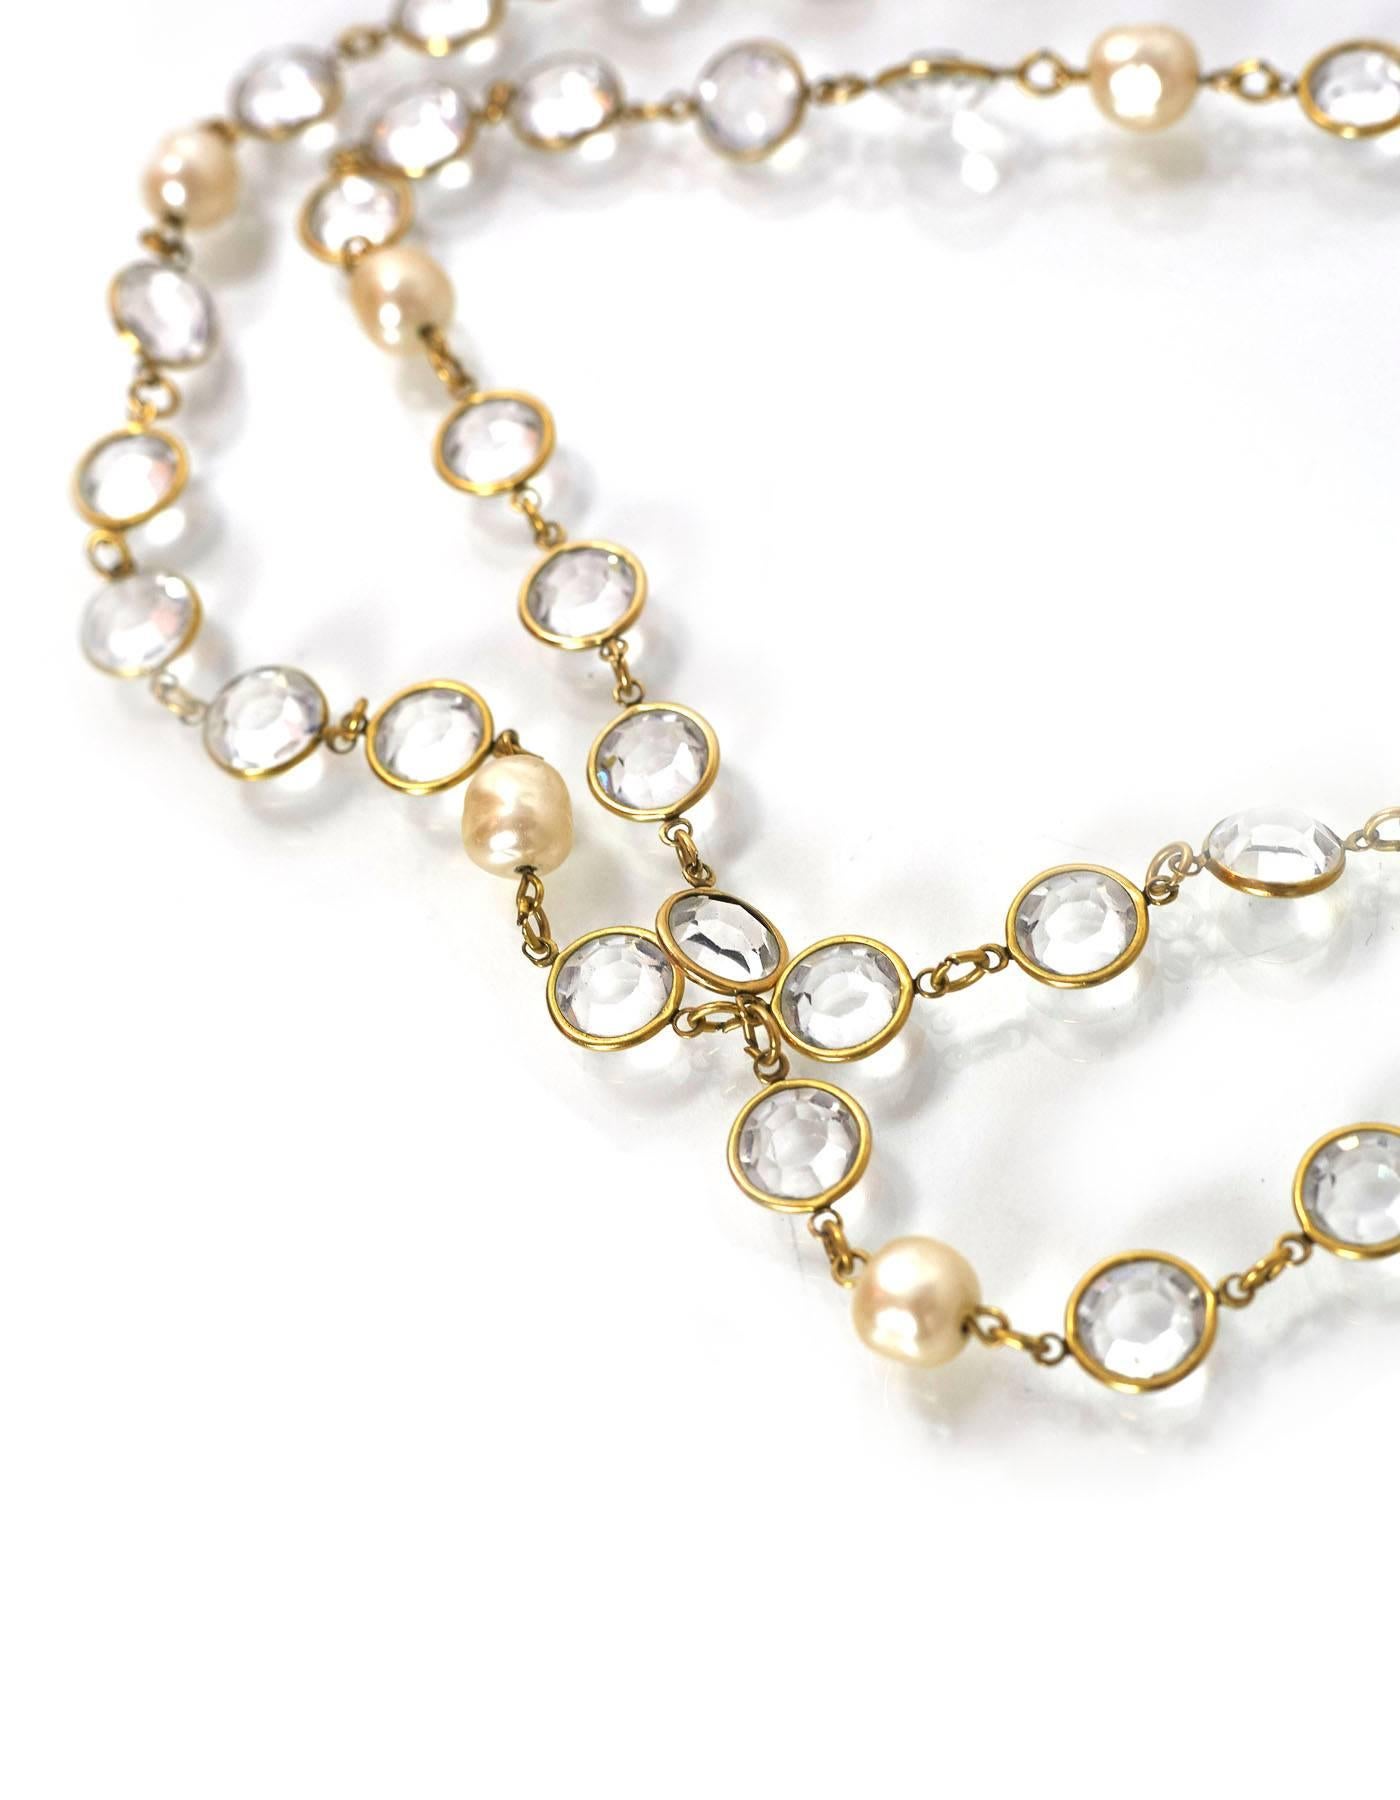 Chanel Crystal & Pearl Sautoir Necklace

Made In: France
Year of Production: 1981
Color: Ivory and clear
Materials: Crystal, faux pearl and metal
Closure/Opening: None
Stamp: Chanel CC 1981
Overall Condition: Excellent vintage, pre-owned